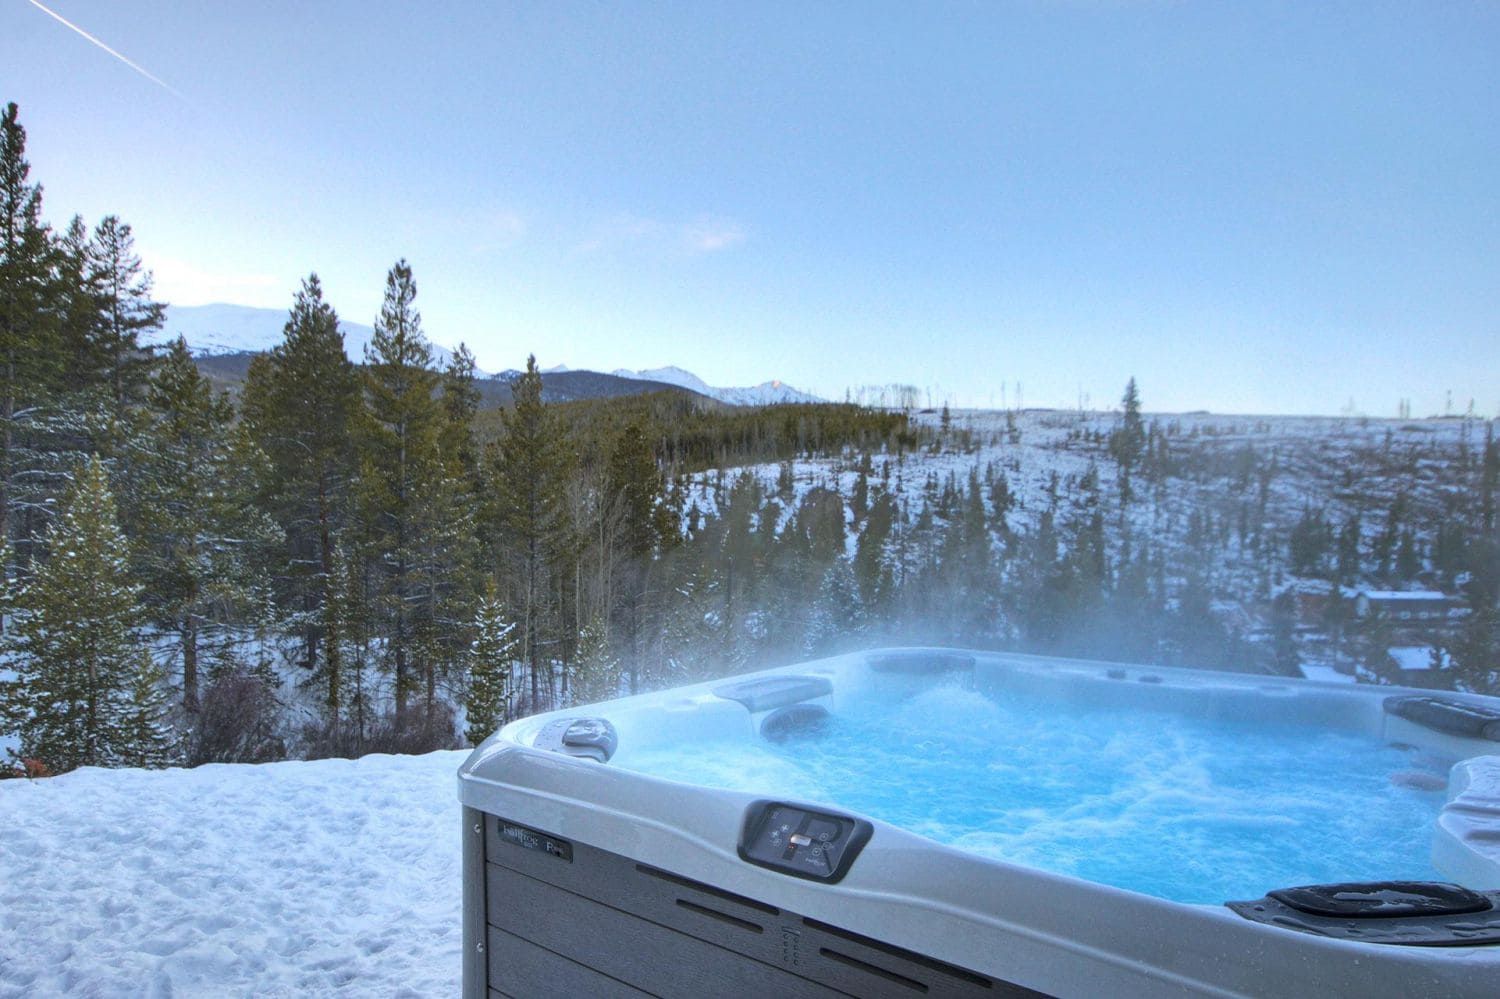 Soothe your achy muscles after a day on the slopes in your own private outdoor hot tub! - 